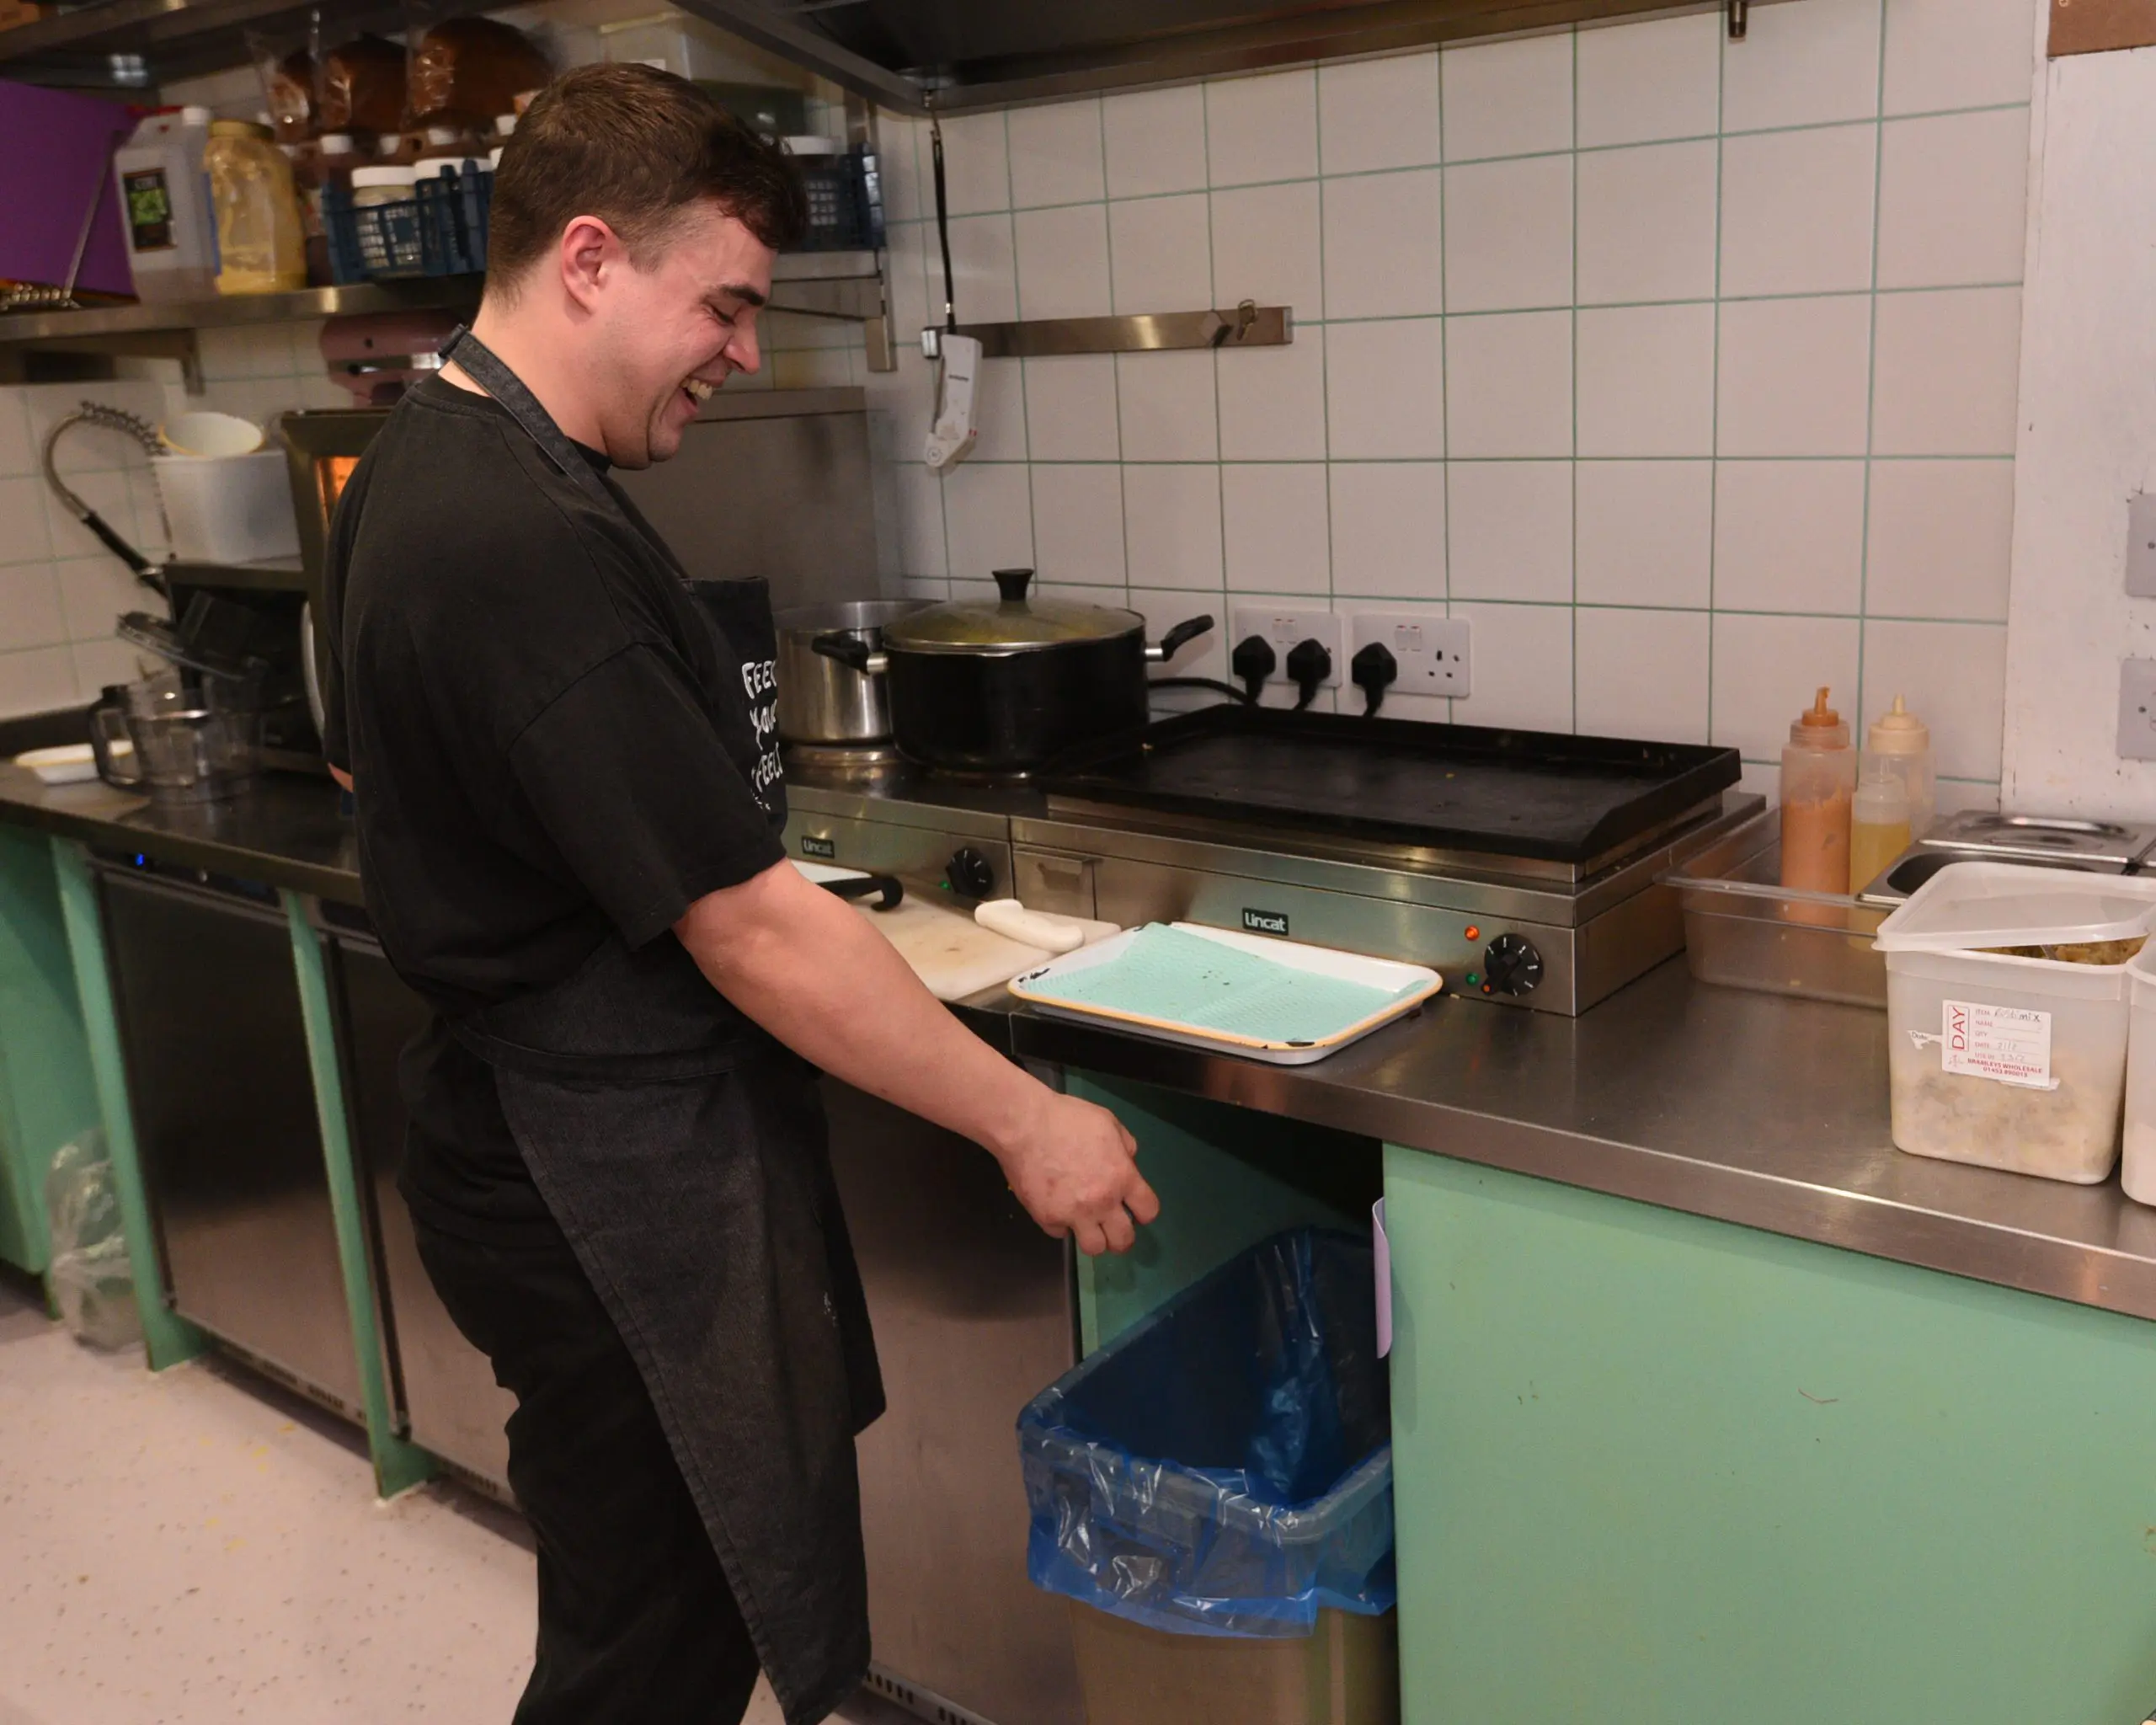 Back-of-house, food waste is easy to segregate